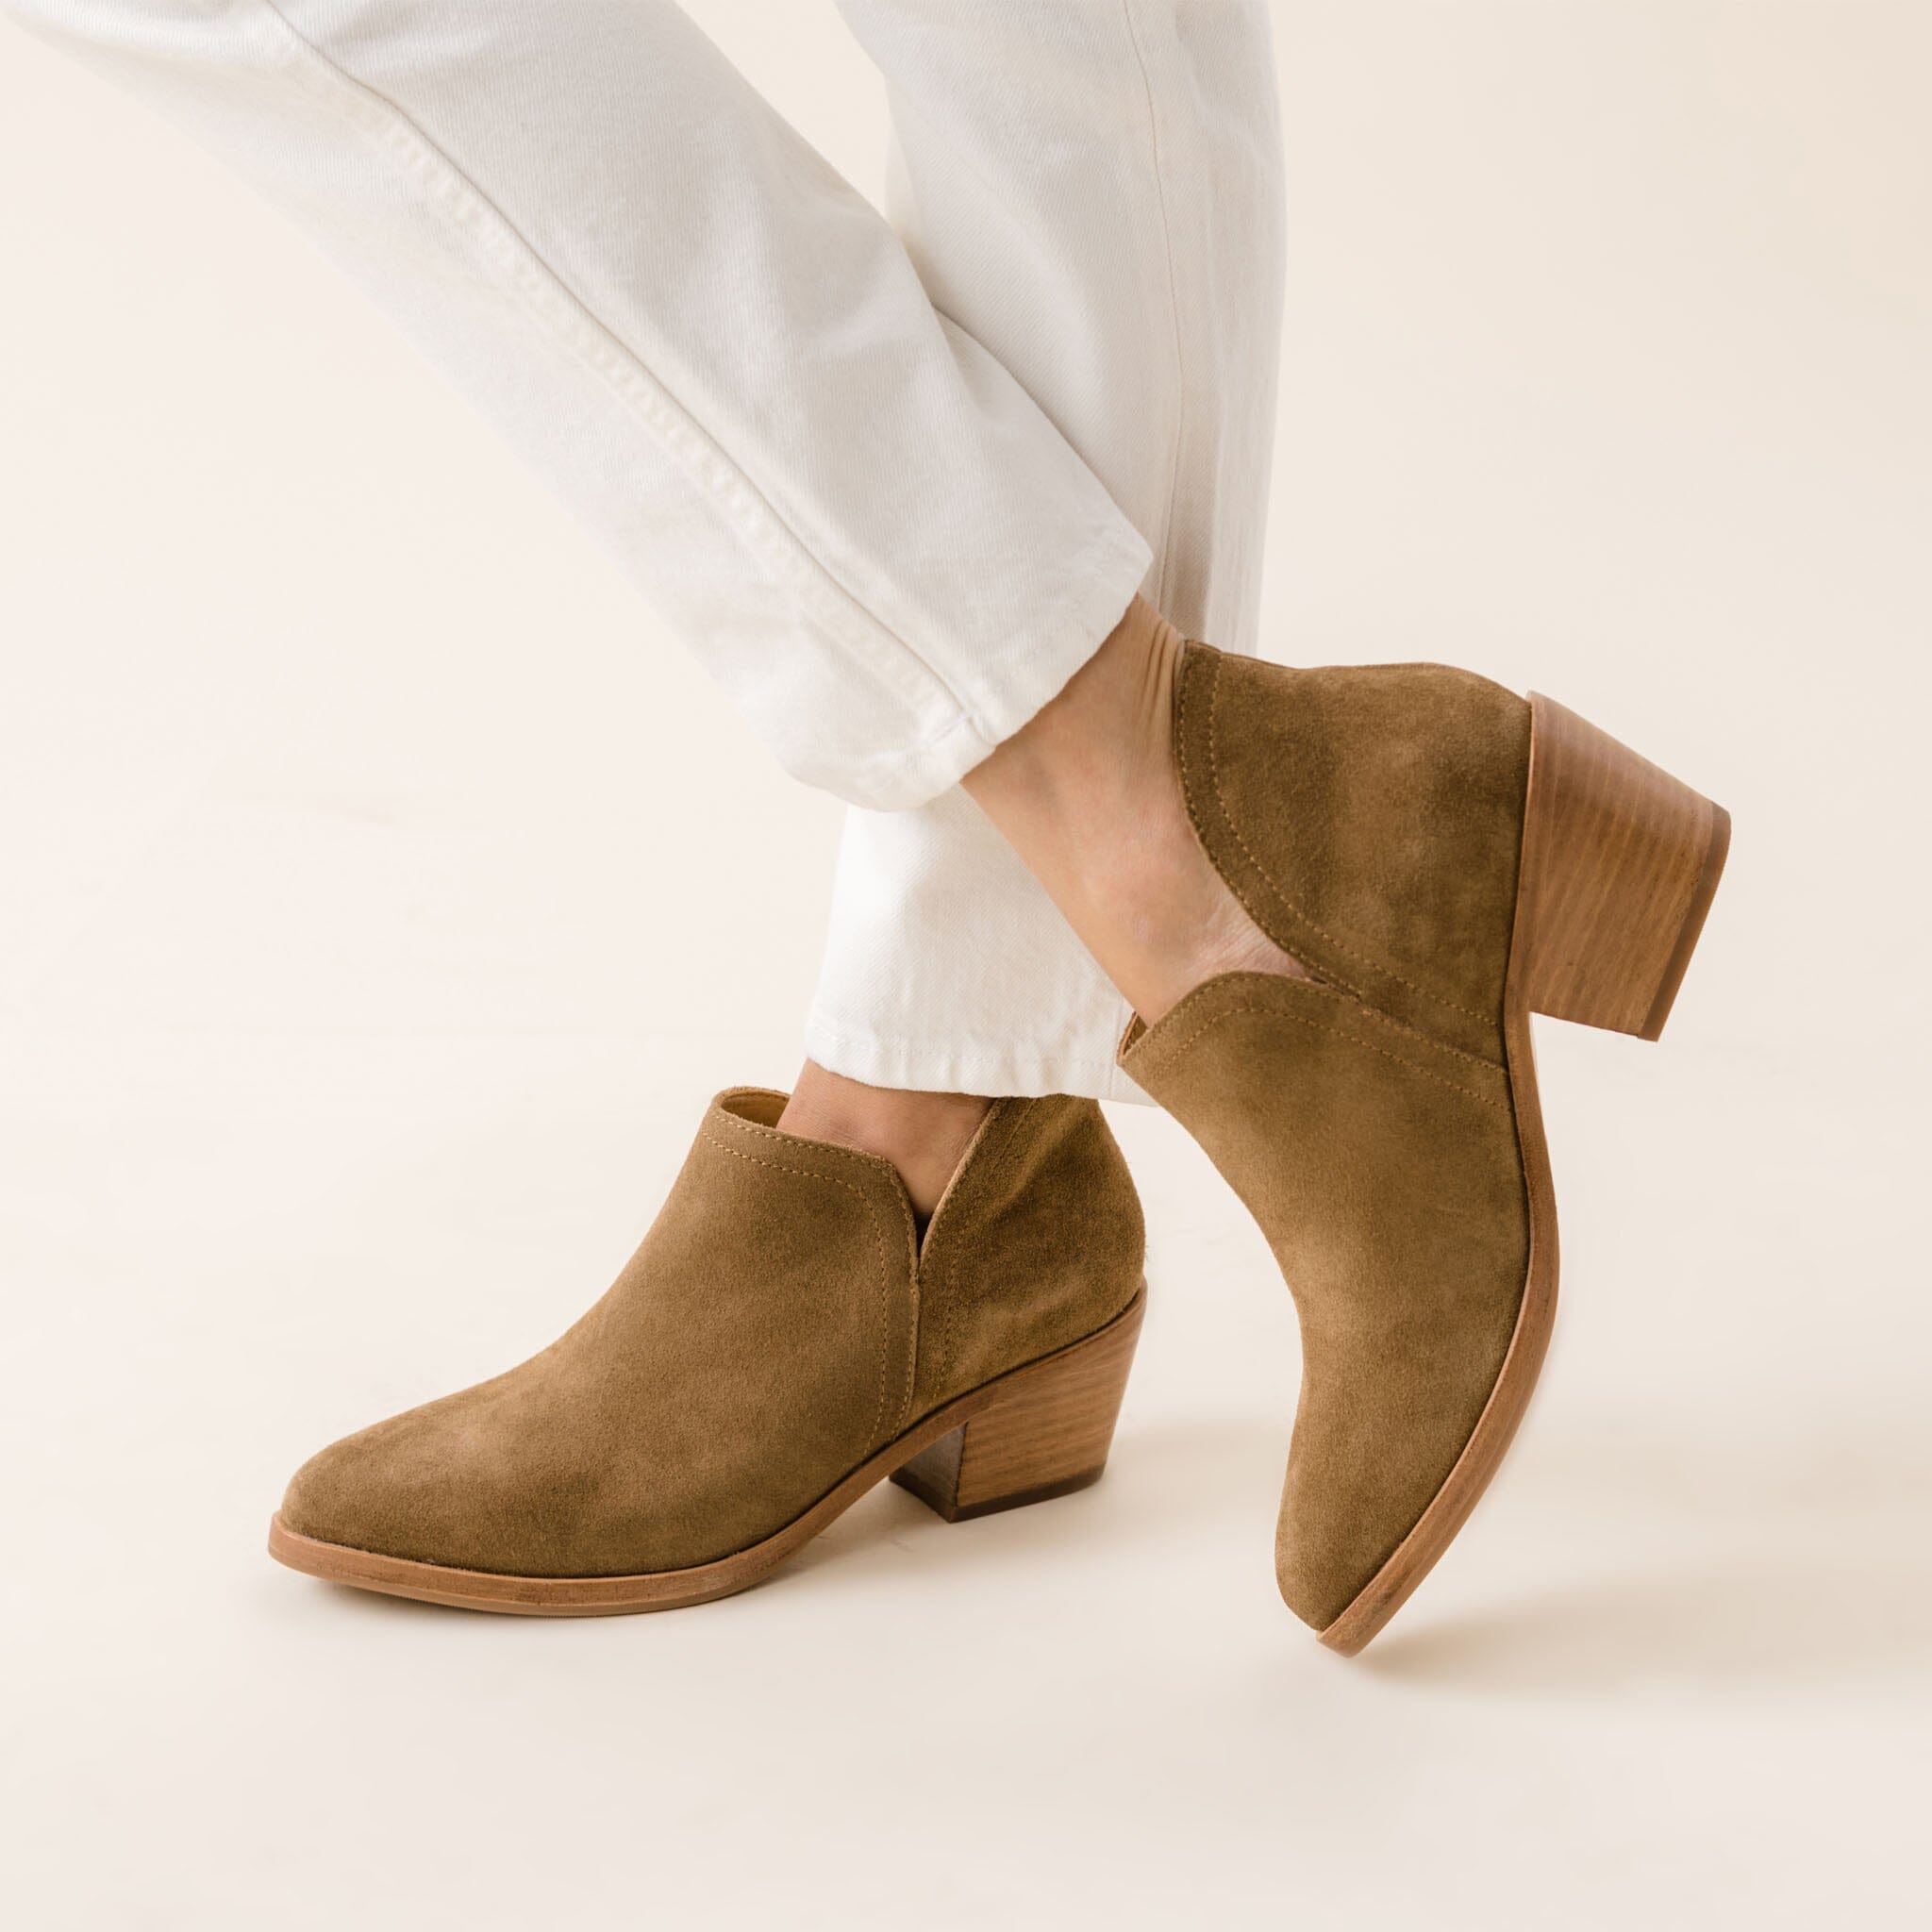 Mia Everyday Ankle Bootie Taupe-Suede Women's Leather Boot Nisolo 